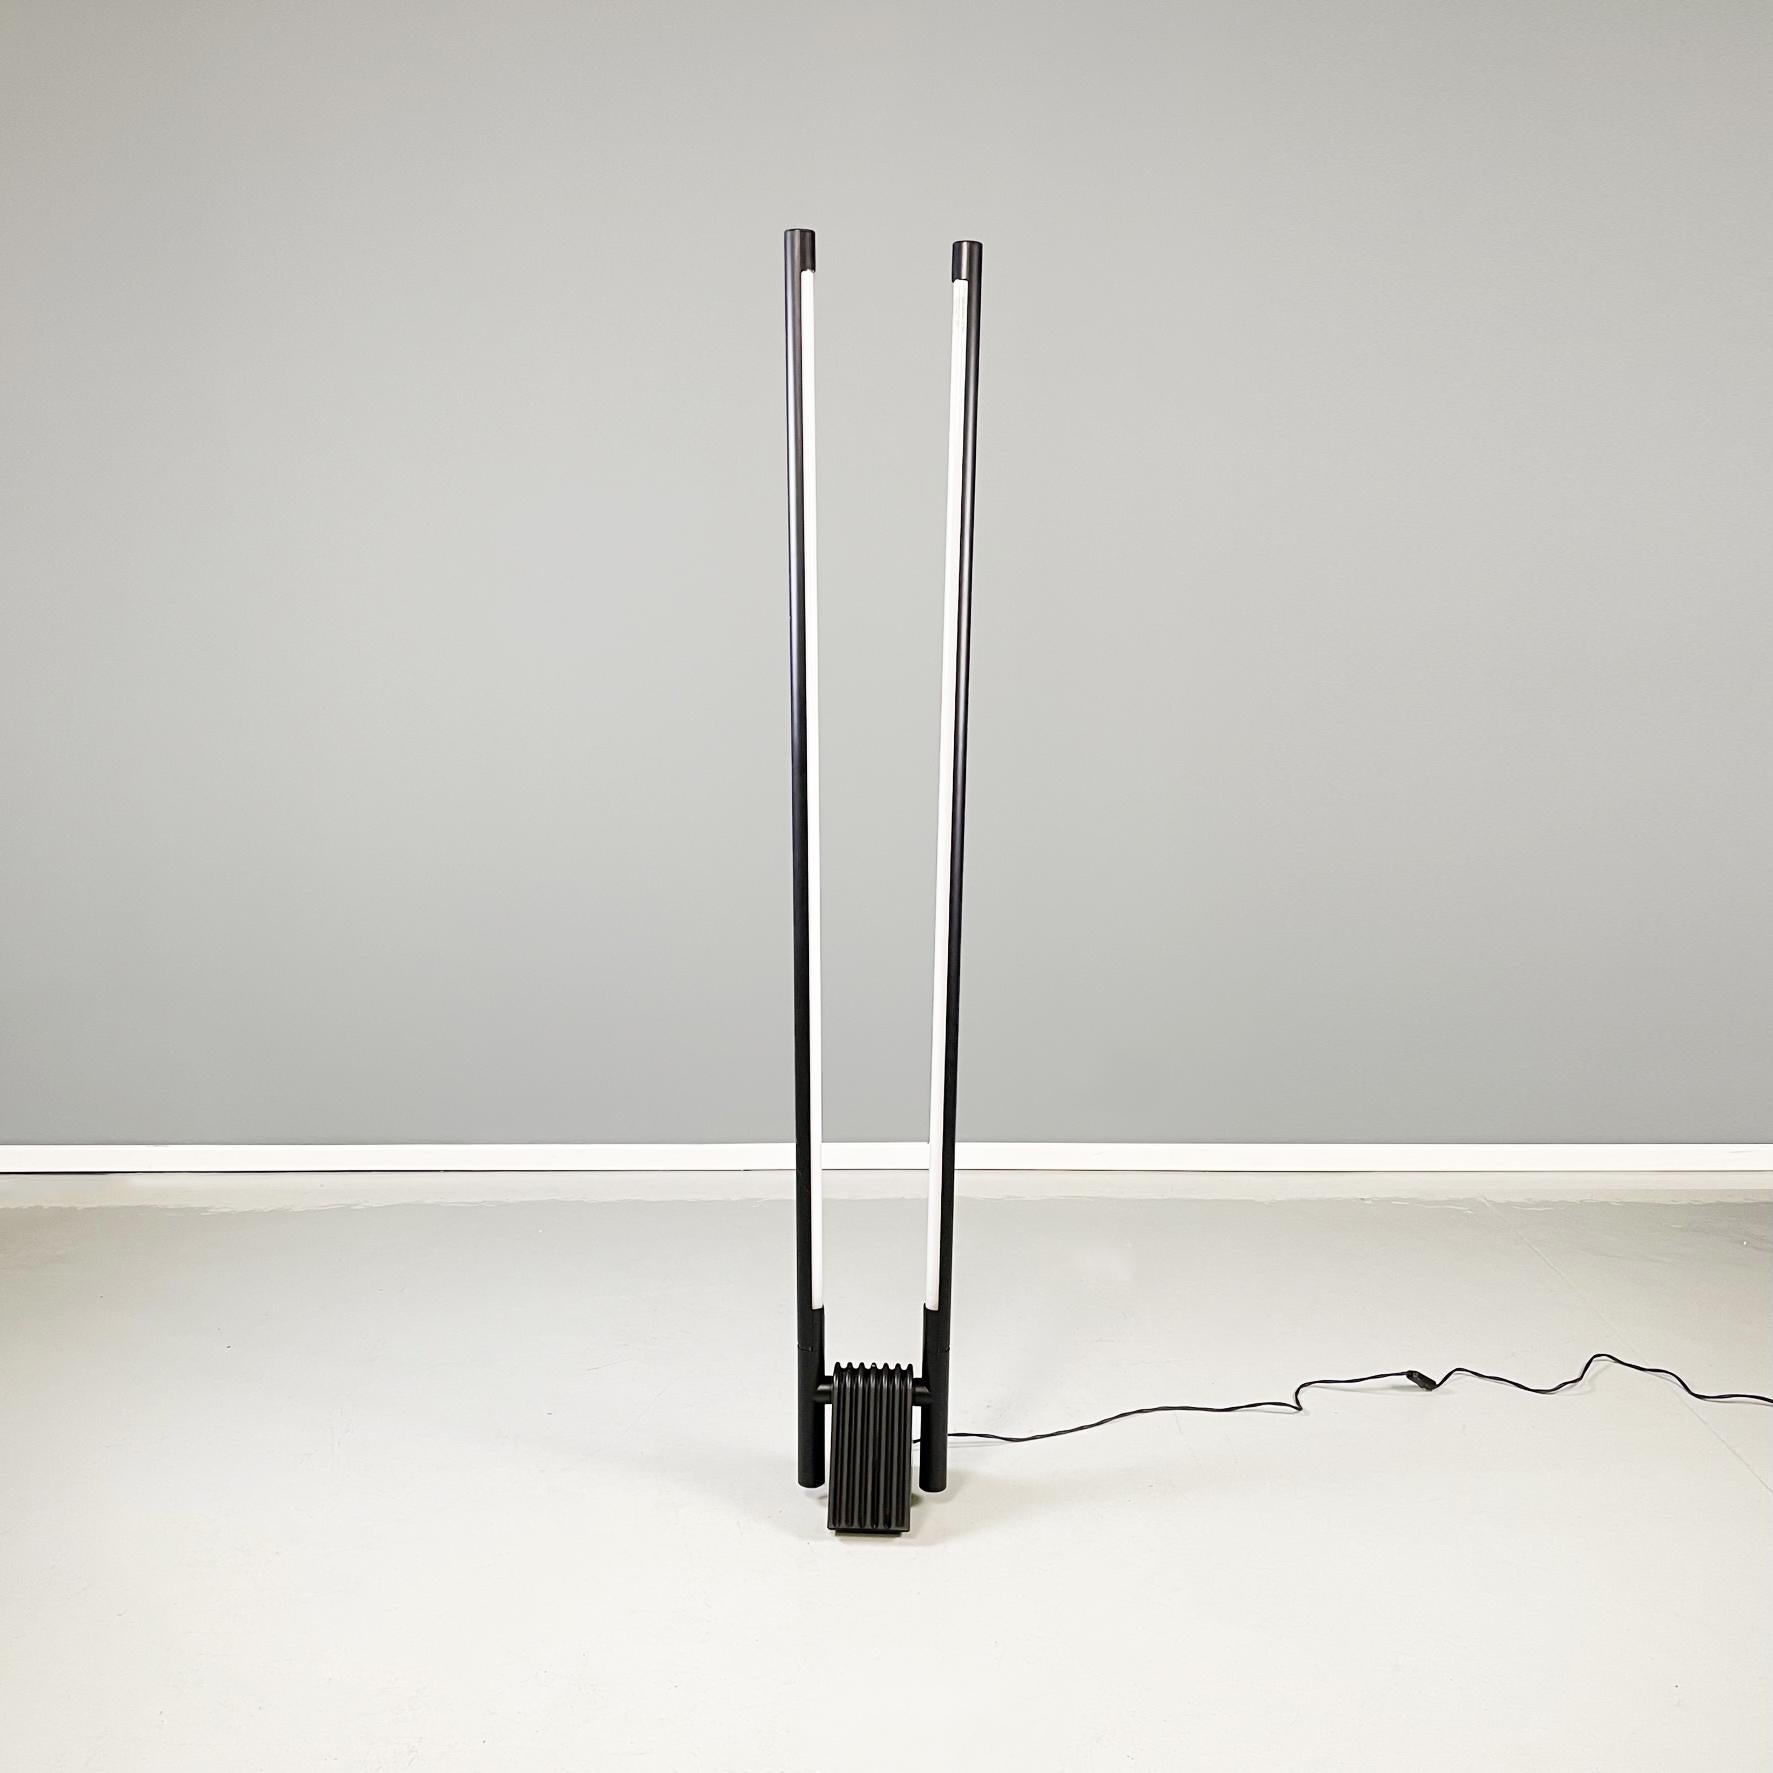 Italian modern adjustable floor lamp Sistema Flu by R. Bonetto for Luci, 1980s
Kinetic floor lamp mod. Sistema Flu with triangular base in black plastic. The two neo lights are adjustable and have a cylindrical structure in black painted